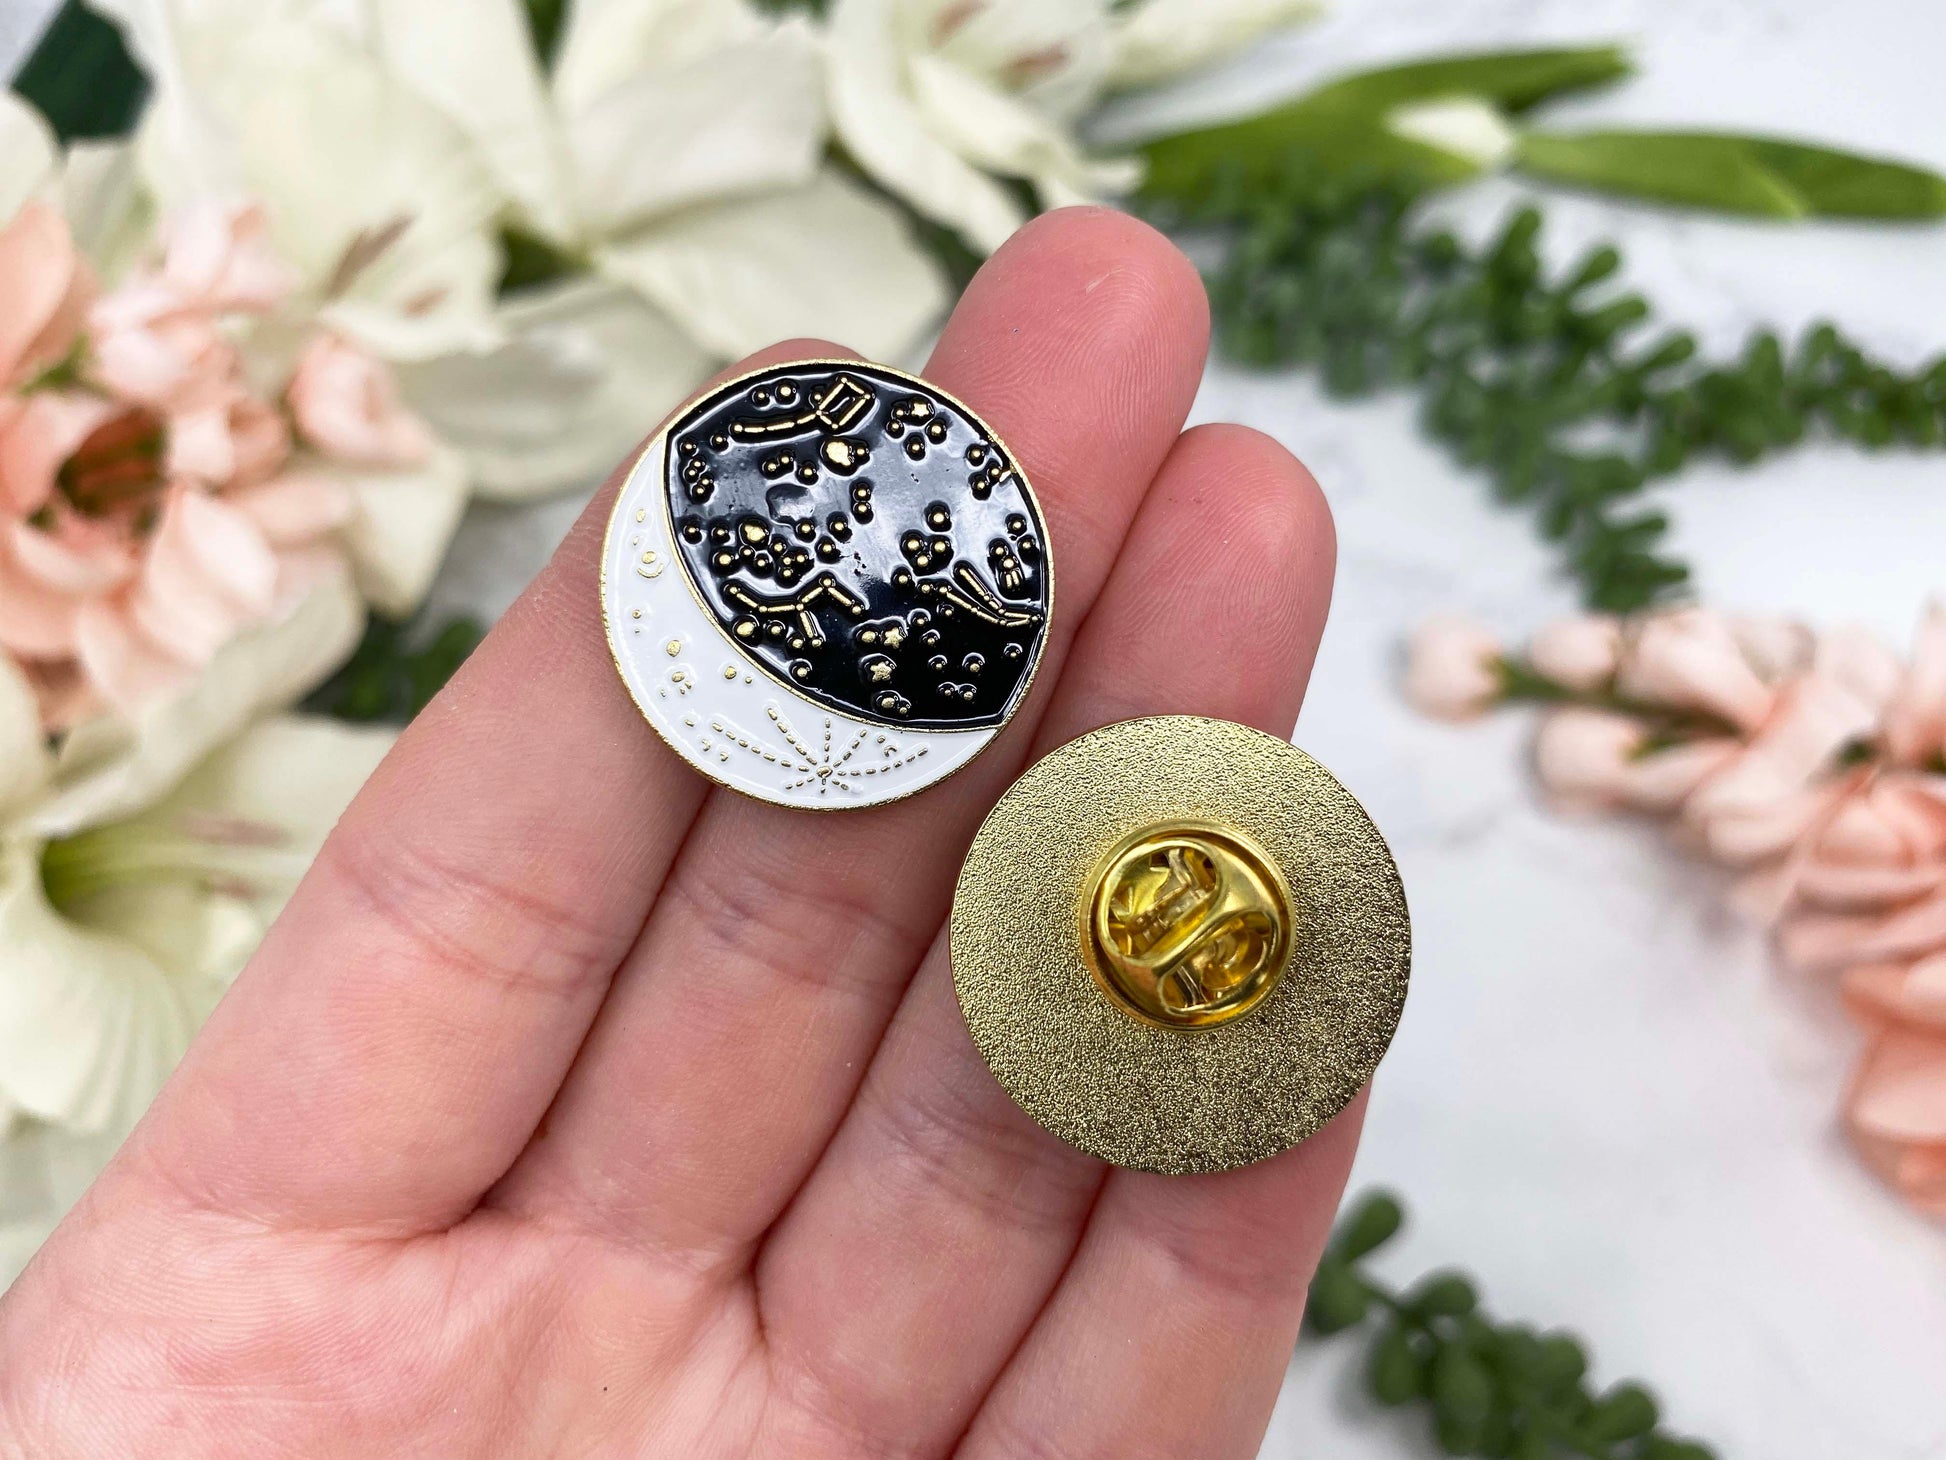 Black, White and Gold Moon Enamel Lapel Pin Set with Back